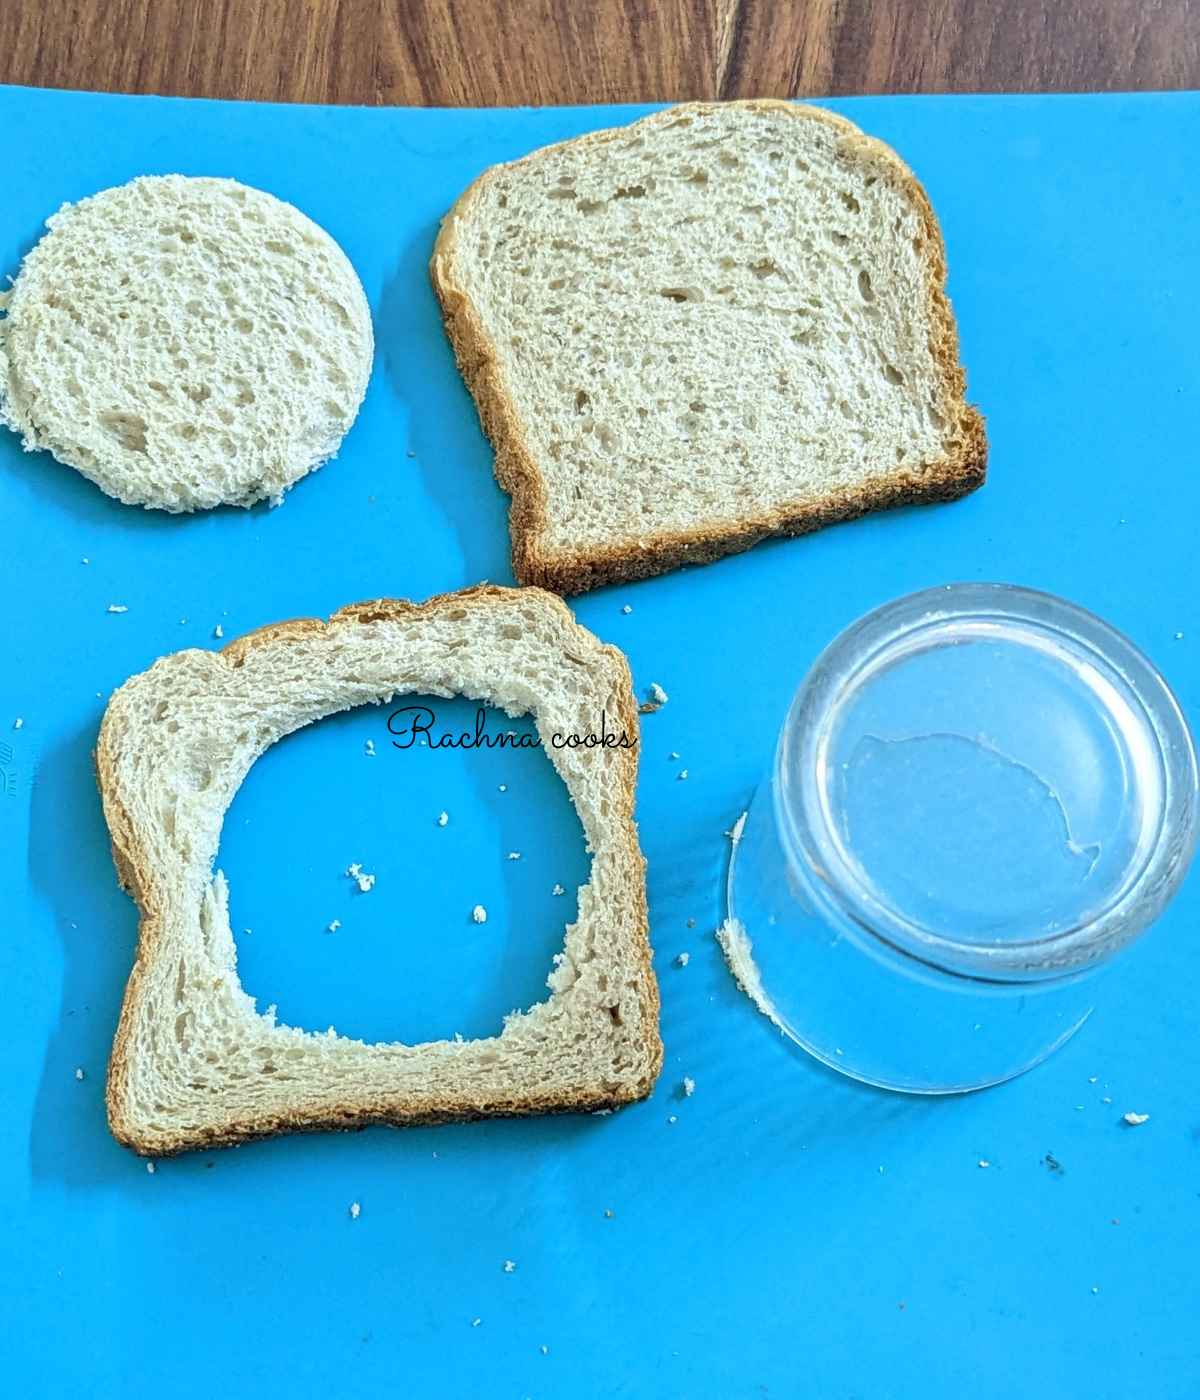 A bread slice with a hole cut out using a glass along with another whole bread.